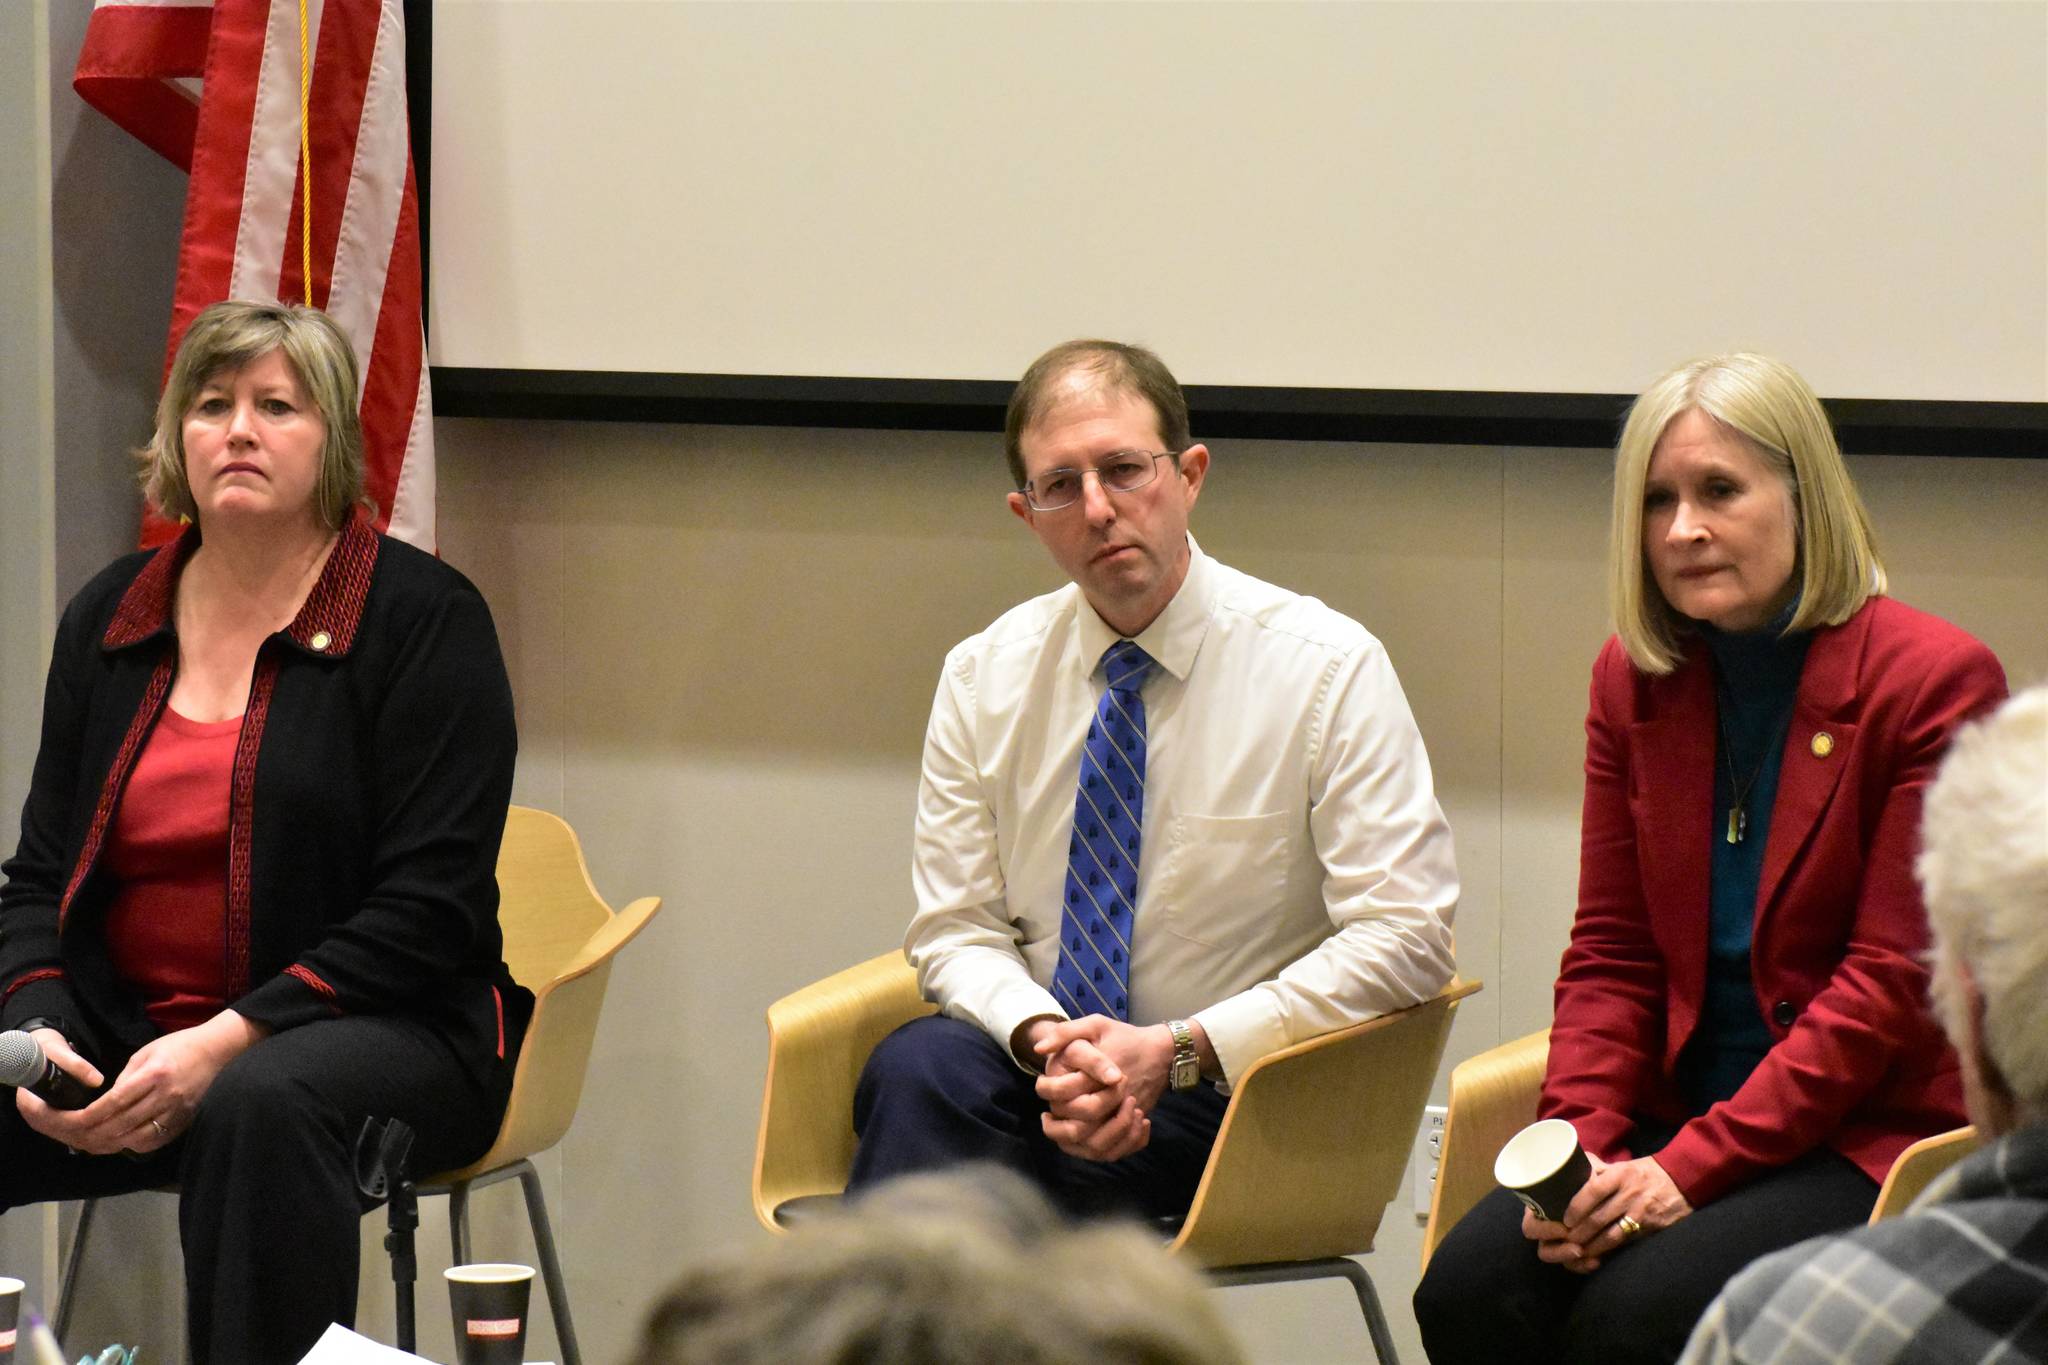 Rep. Sara Hannan, left, Sen. Jesse Kiehl and Rep. Andi Story, Juneau’s all-Democrat legislative delegation, takes questions at a town hall at the Mendenhall Valley Public Library on Wednesday, Jan. 15, 2020. (Peter Segall | Juneau Empire)